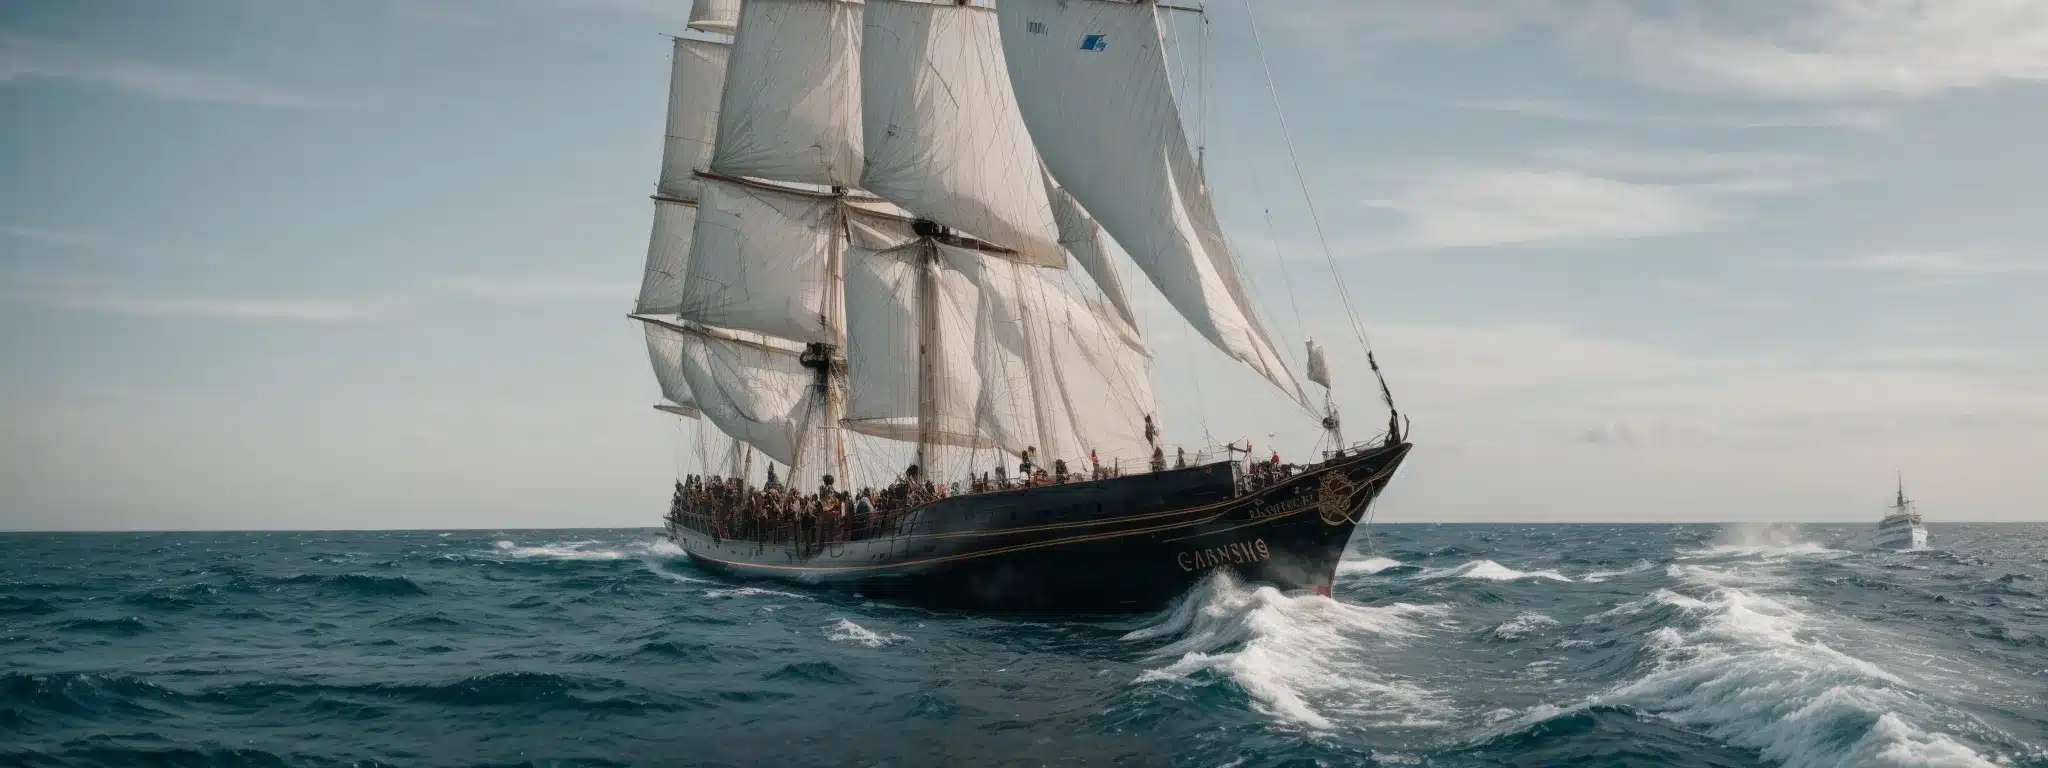 A Captain Confidently Steering A Large Sailing Ship Across A Calm Sea, With A Crew Efficiently Working In Harmony Around Him.